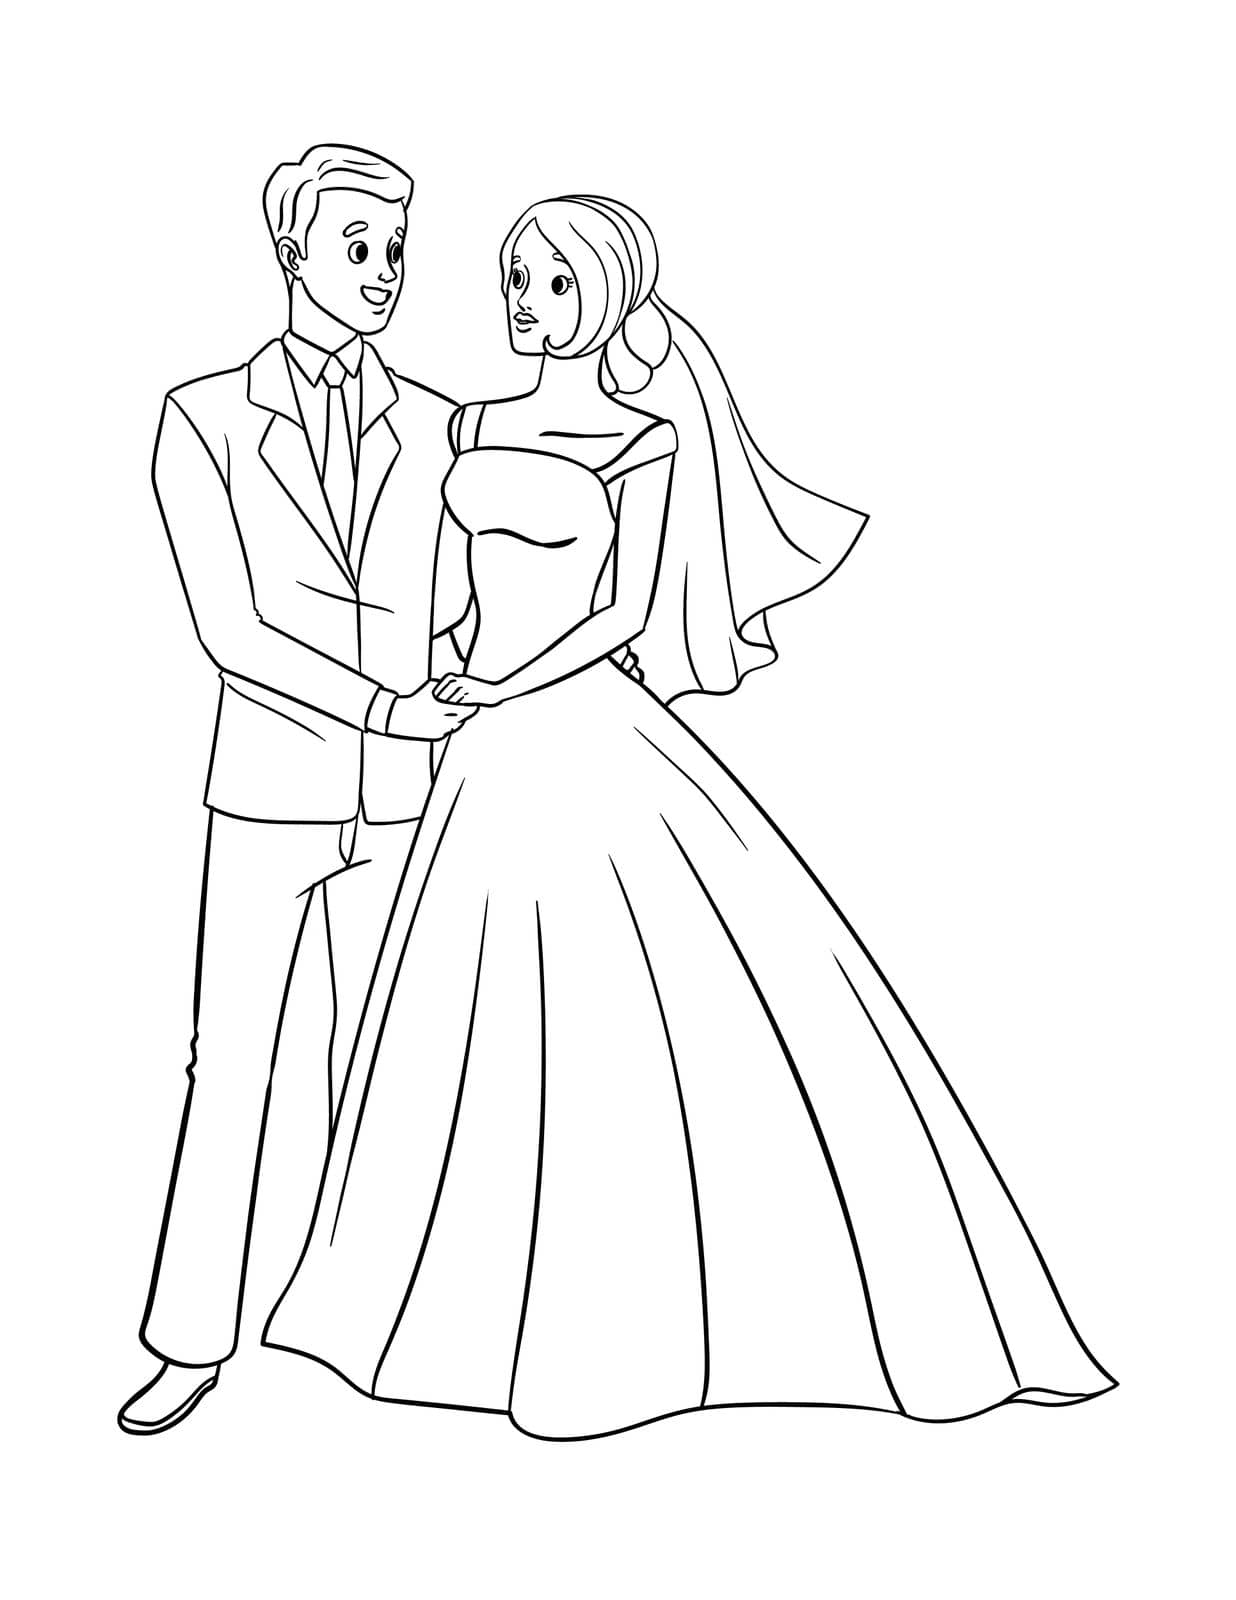 Wedding Groom And Bride Isolated Coloring Page by abbydesign